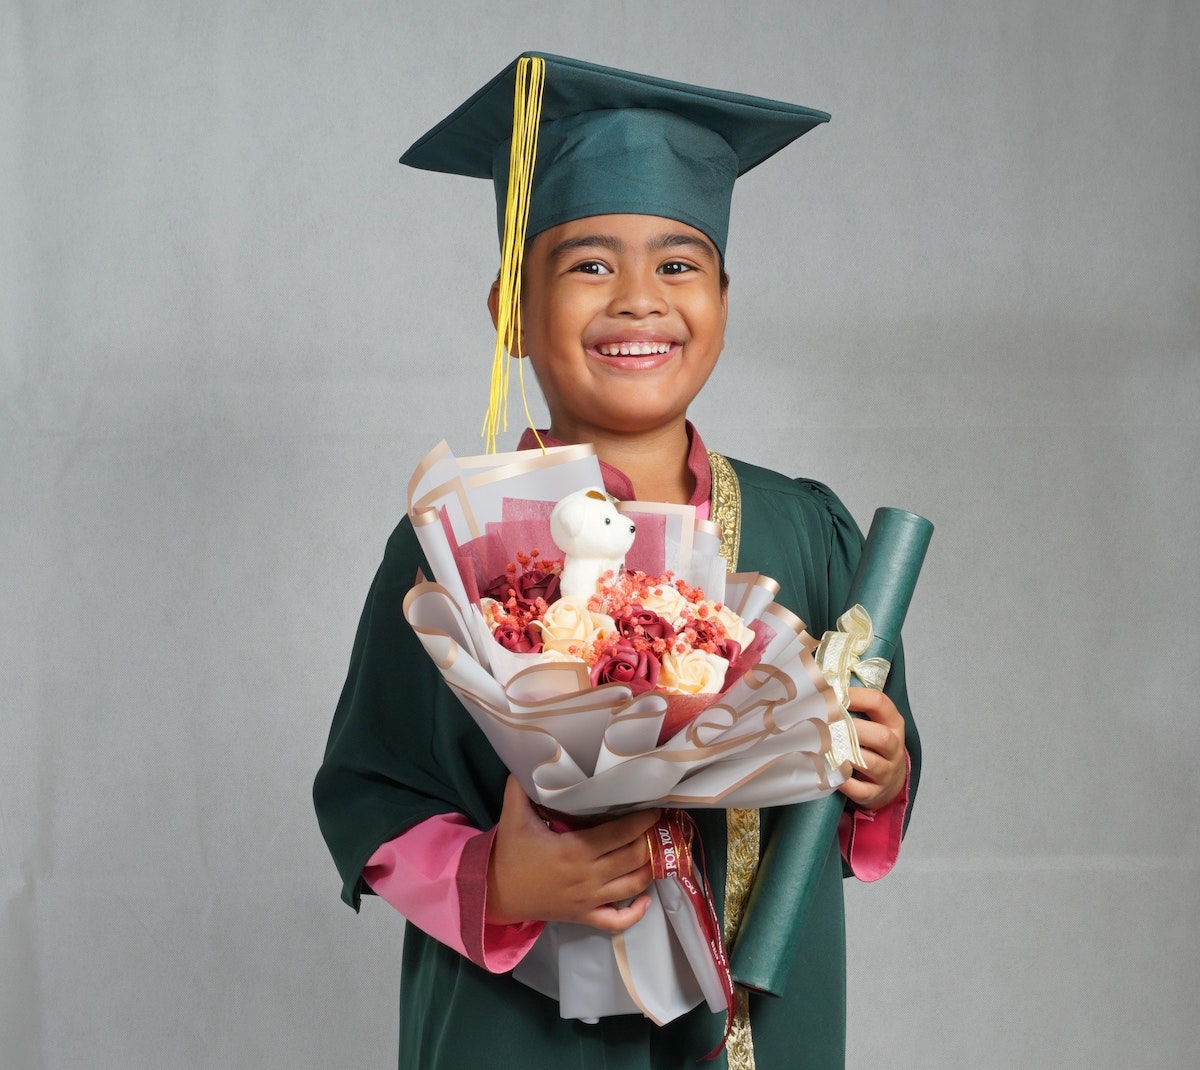 a child in graduation robe and cap holding flowers and diploma